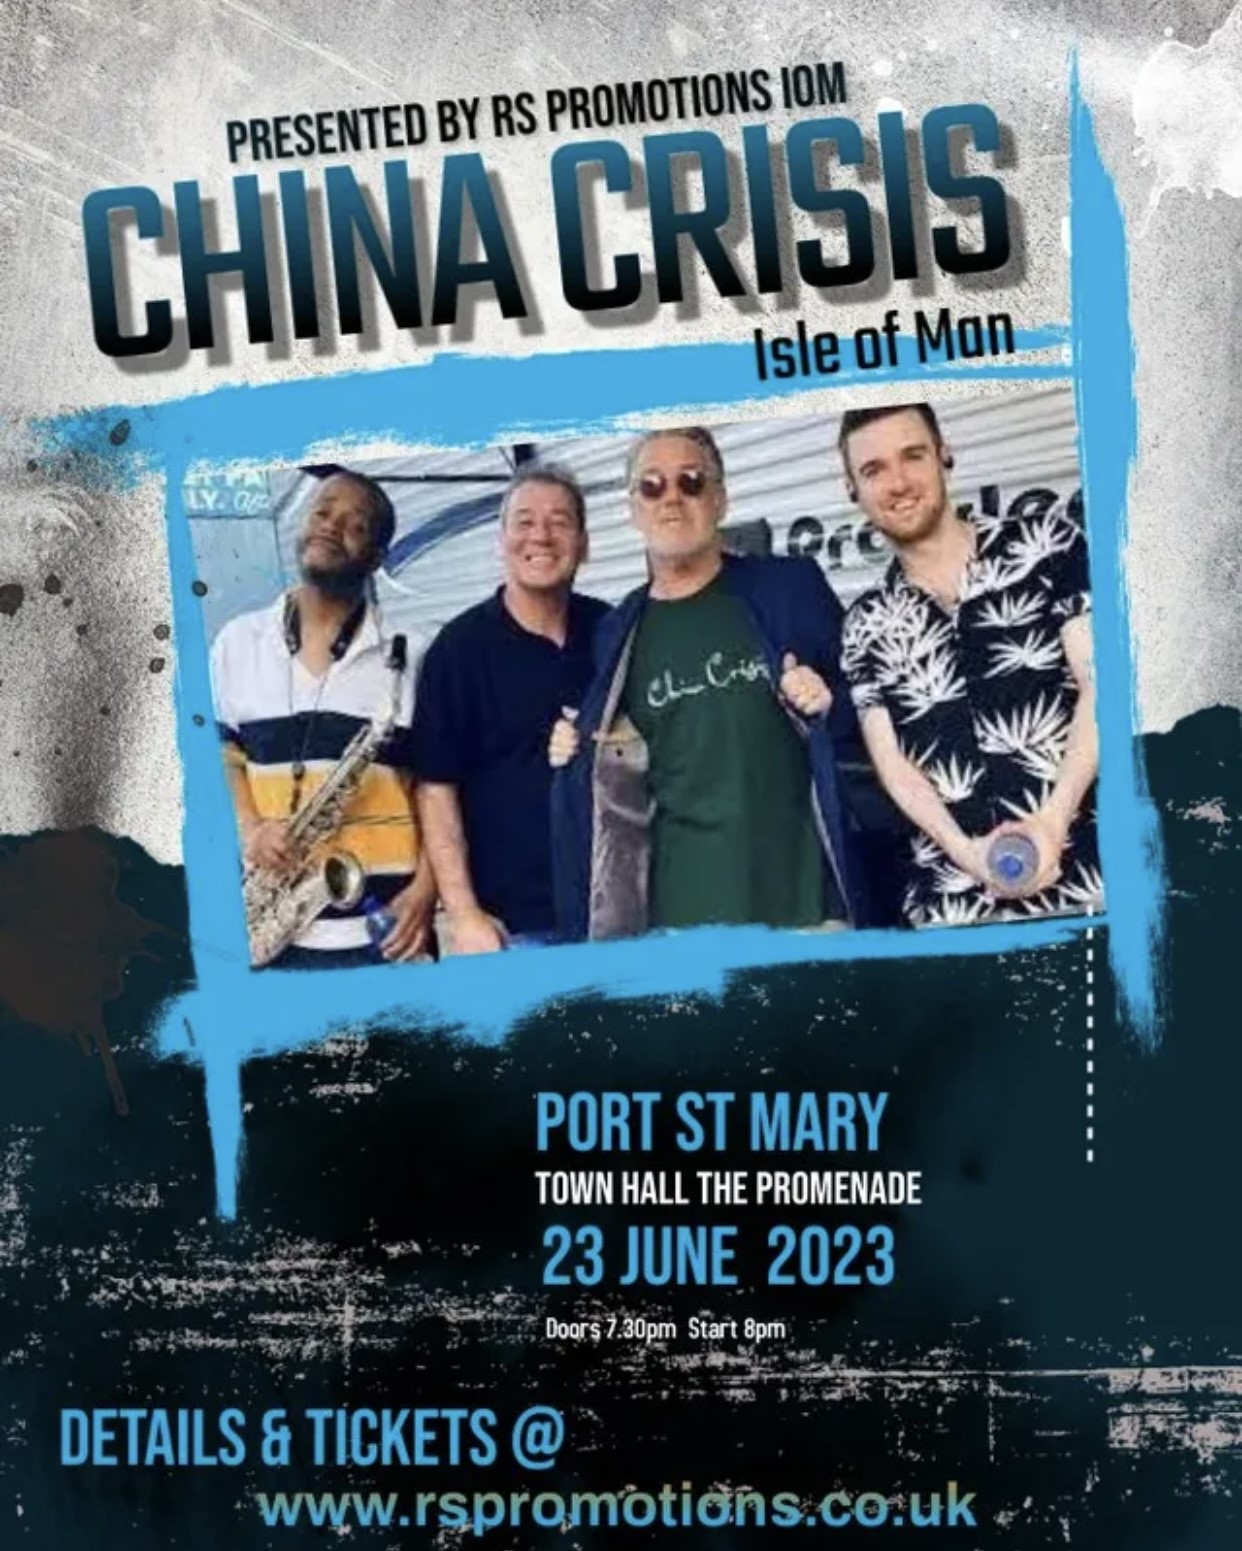 An Evening with CHINA CRISIS In Port St Mary, Isle of Man  on Jun 23, 20:00@Town Hall, The Promenade, Port St Mary - Buy tickets and Get information on RS PROMOTIONS 